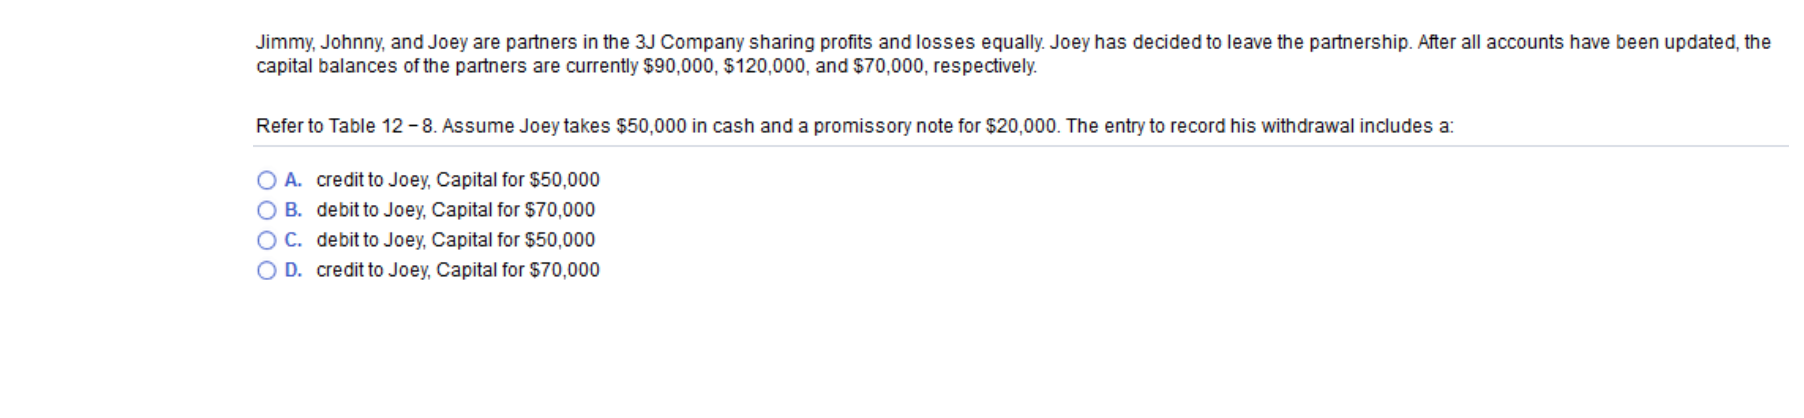 Jimmy, Johnny, and Joey are partners in the 3J Company sharing profits and losses equally. Joey has decided to leave the partnership. After all accounts have been updated, the
capital balances of the partners are currently $90,000, $120,000, and $70,000, respectively.
Refer to Table 12-8. Assume Joey takes $50,000 in cash and a promissory note for $20,000. The entry to record his with drawal includes a
O A.
O B.
credit to Joey, Capital for $50,000
debit to Joey, Capital for $70,000
C. debit to Joey, Capital for $50,000
O D. credit to Joey, Capital for $70,000
